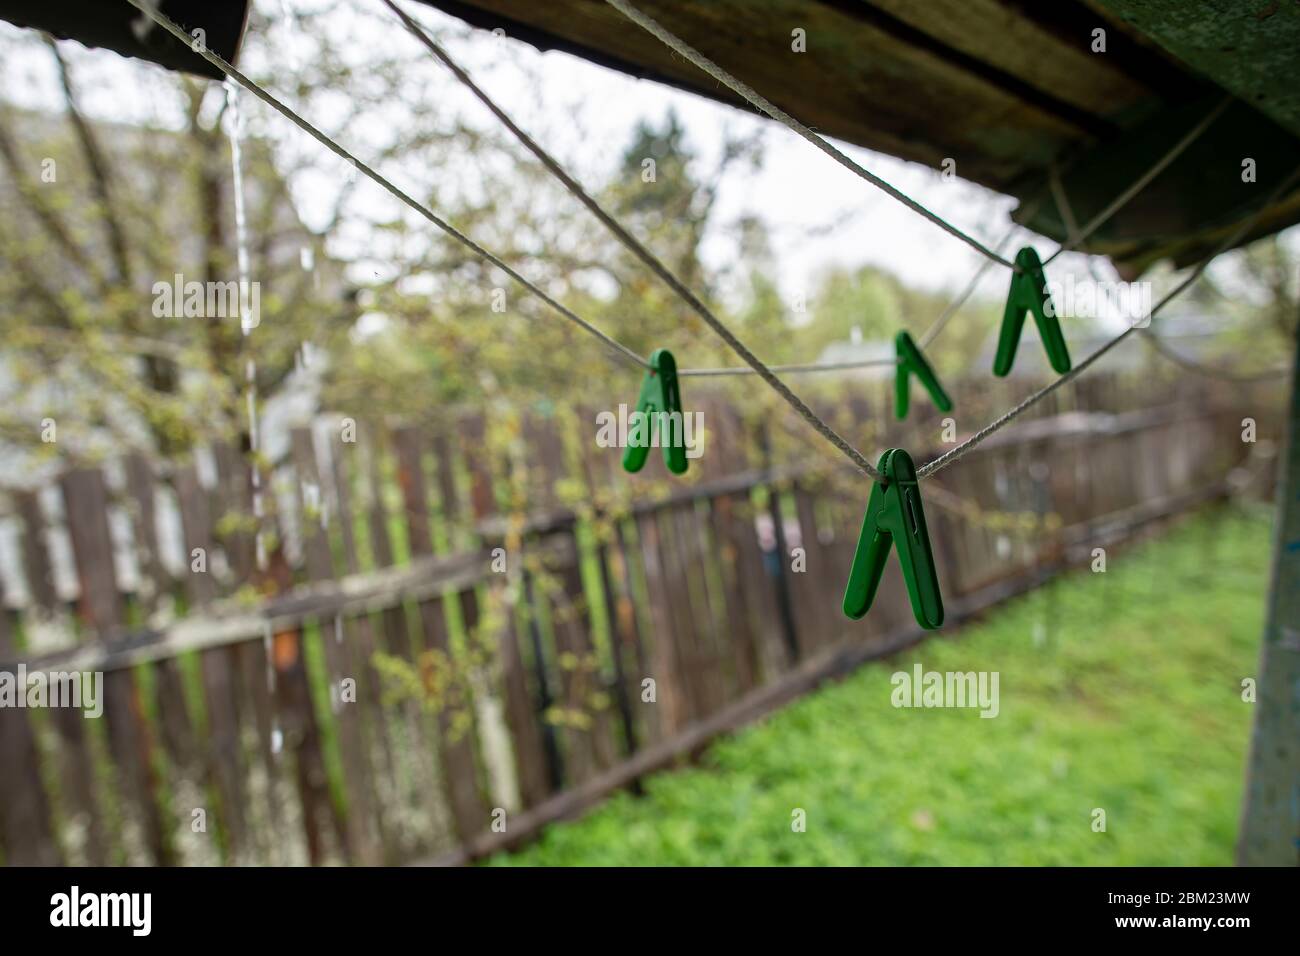 Plastic clothespins hang on a clothesline, under the porch roof, in the rain, against the background of an old fence and garden. Stock Photo